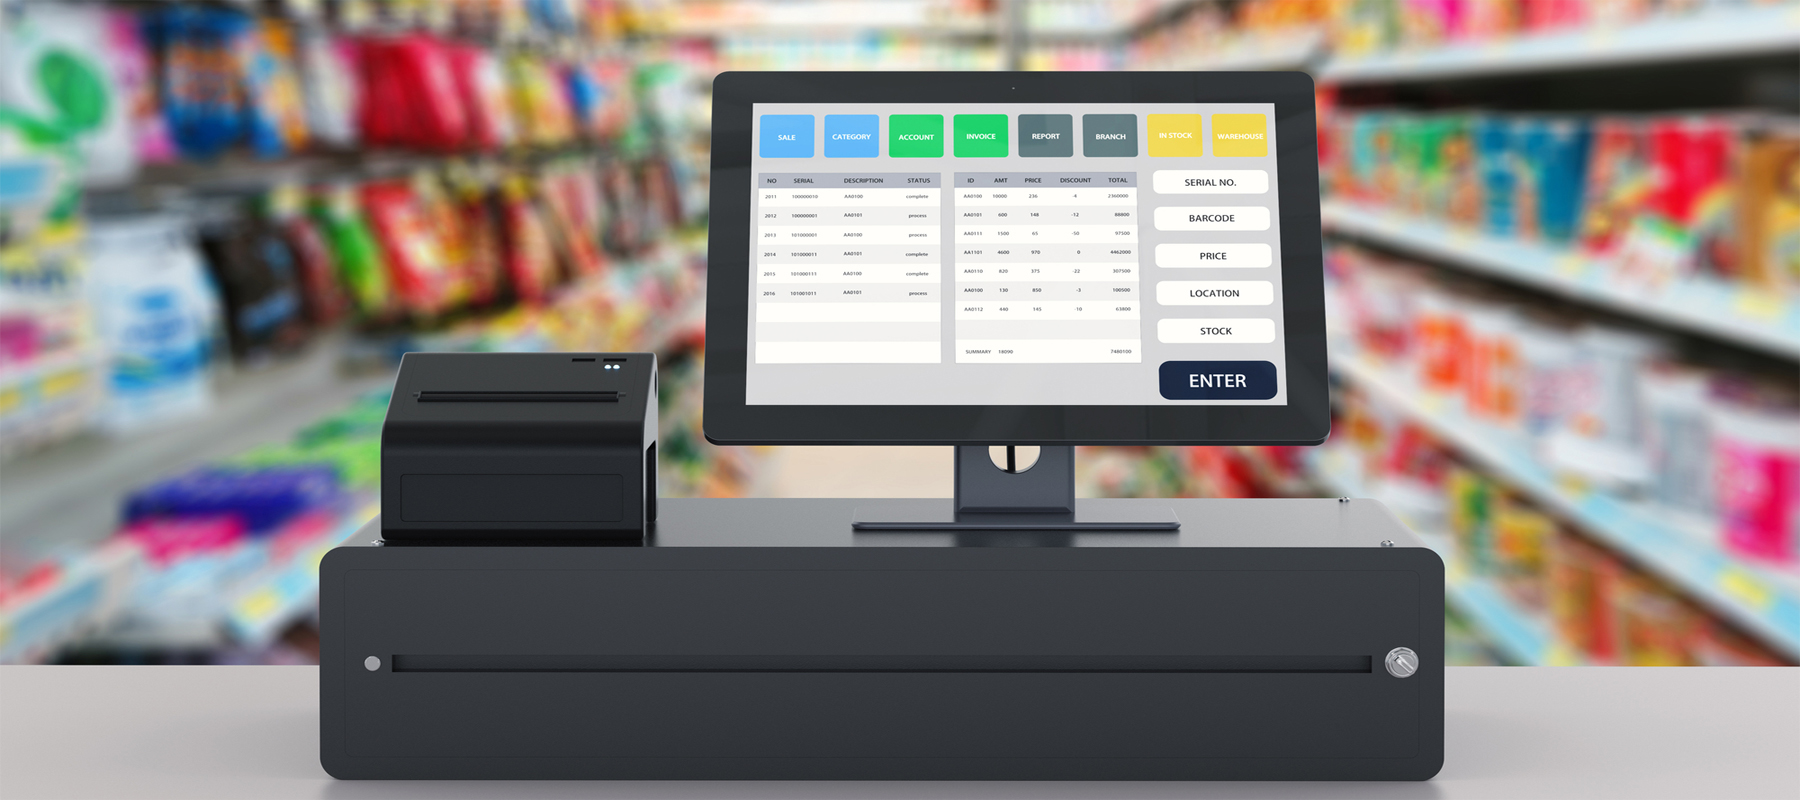 POS System with Grocery Store Background